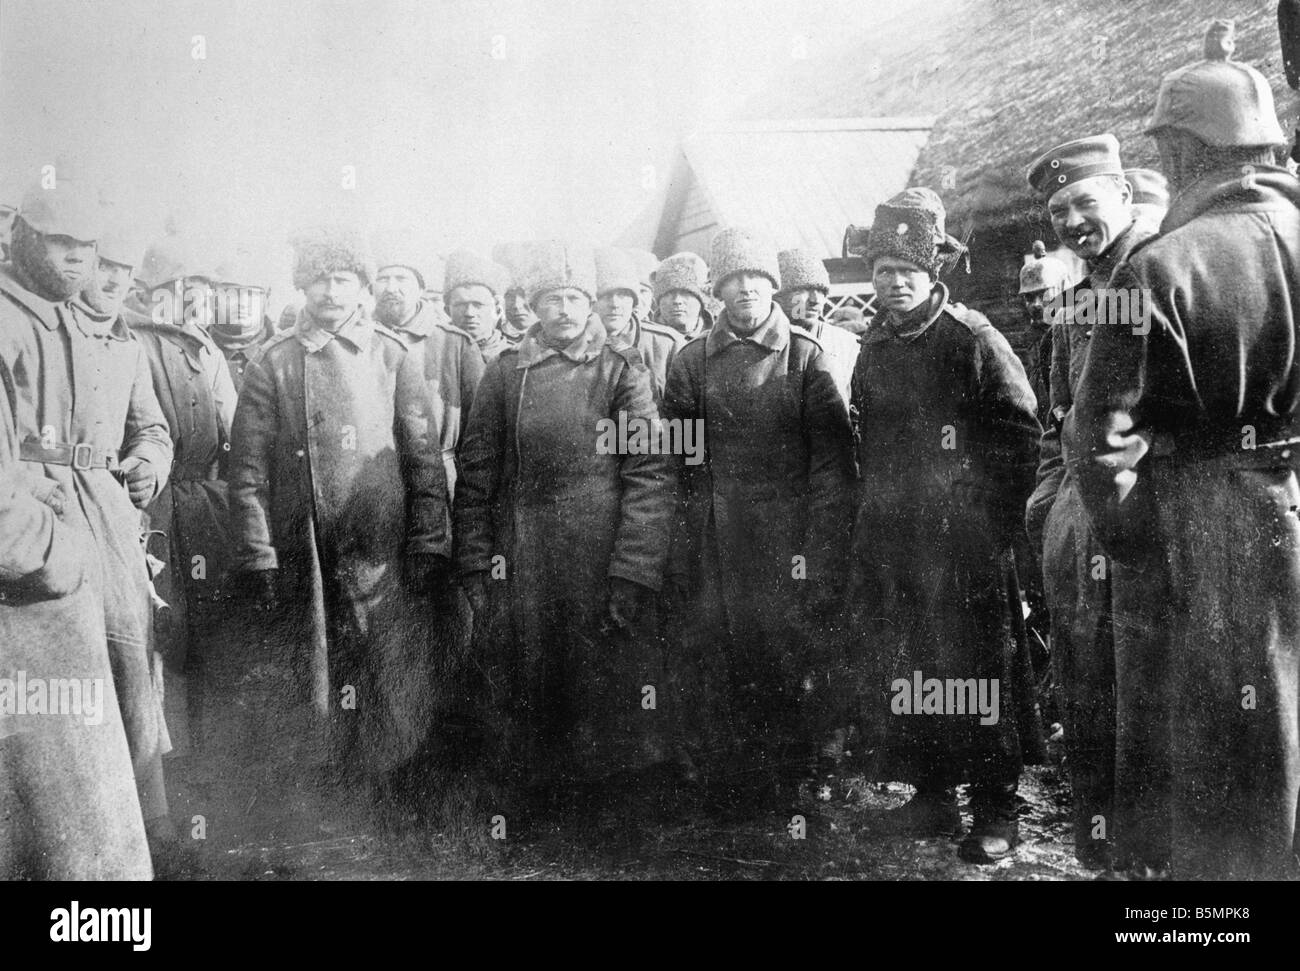 9 1916 3 18 A1 14 Battle of Postawy 1916 Russ prisoners World War 1 Eastern Front Defeat of Russian troops after an offen sive o Stock Photo